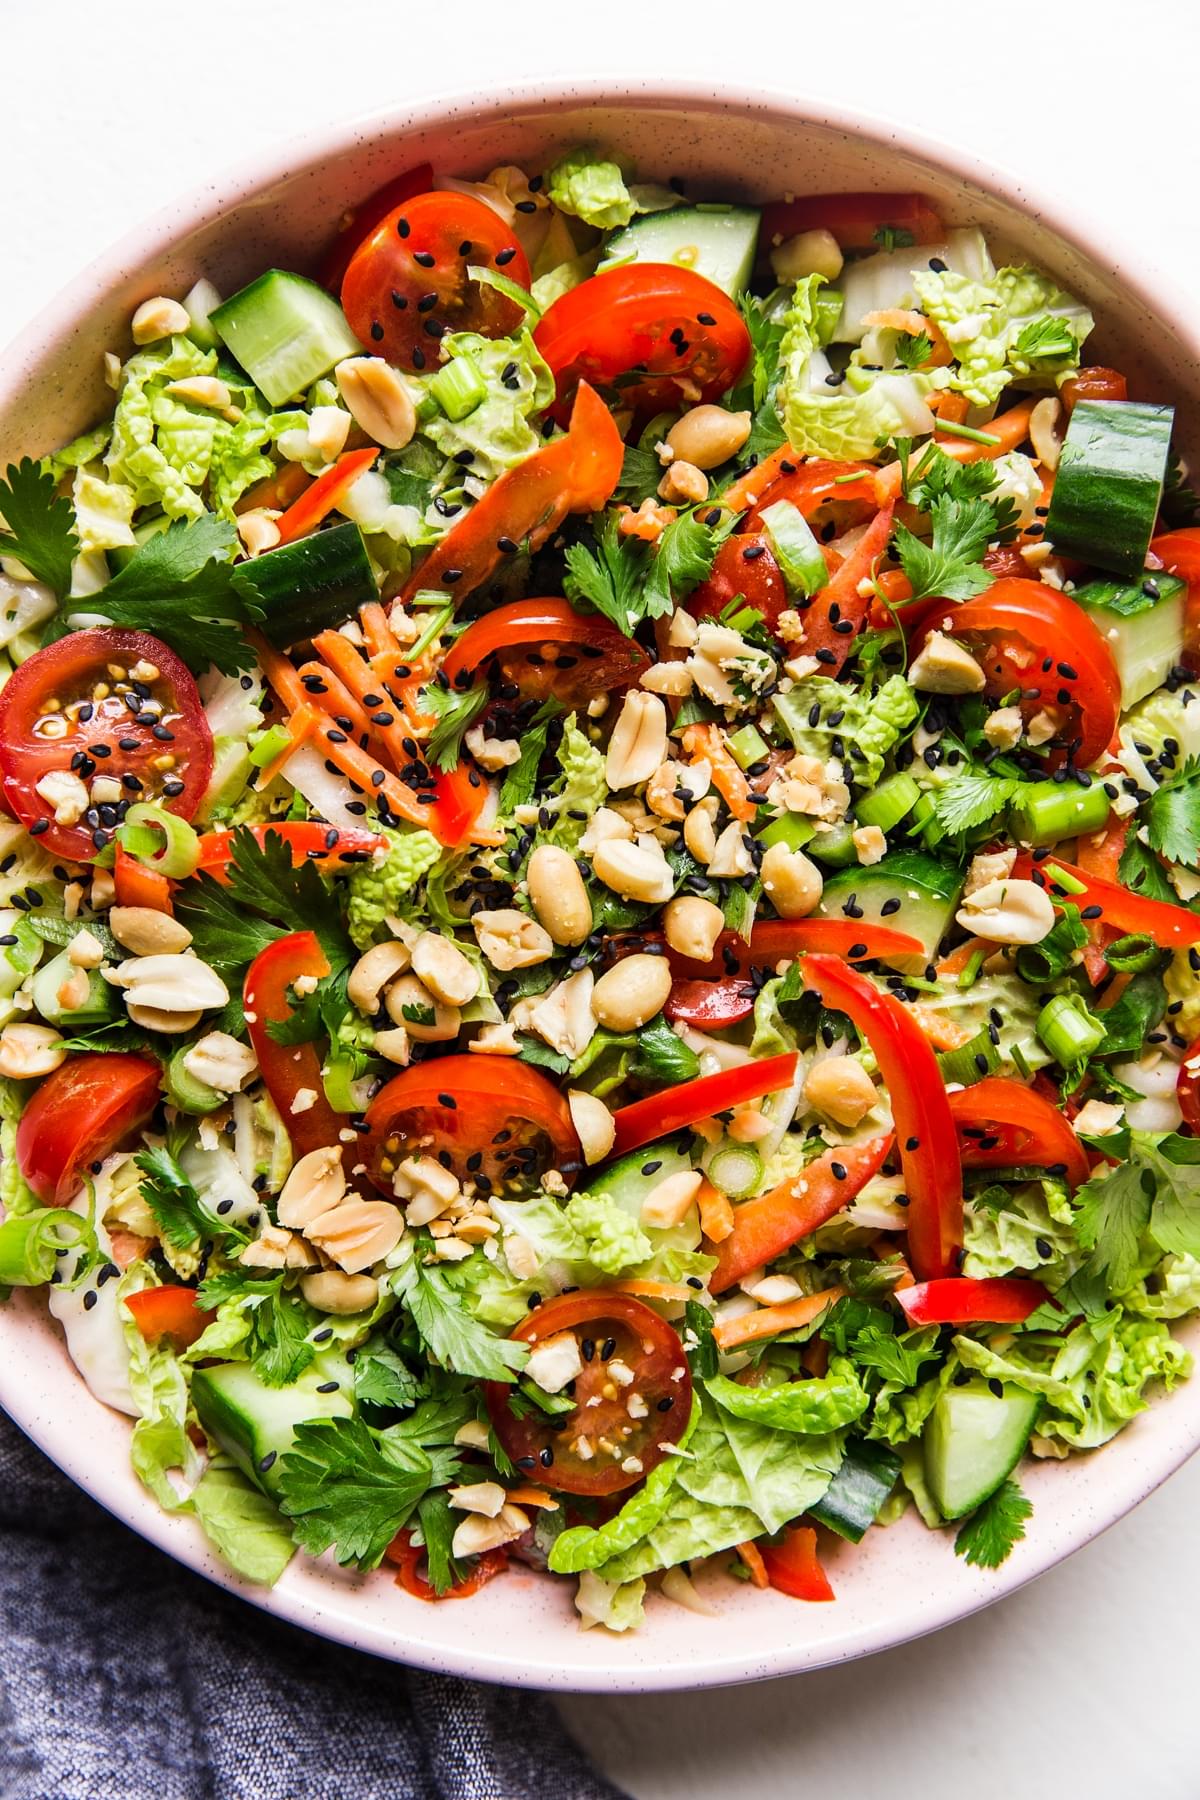 Asian chop salad with sesame seeds, red bell pepper